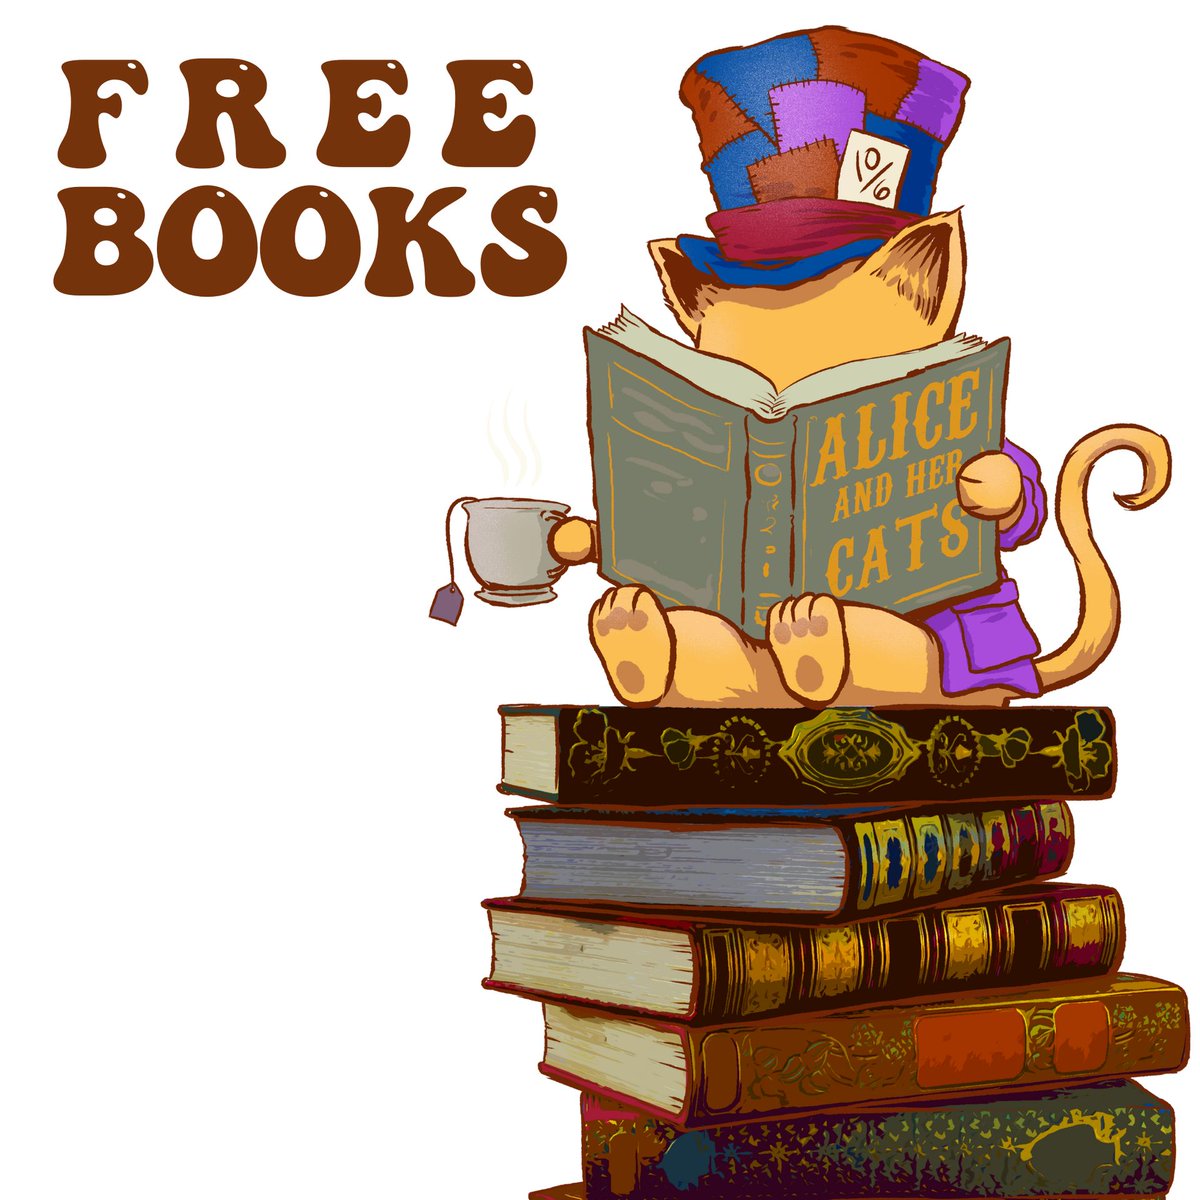 These are family-friendly books, filled with beautiful art and comics. brianandersonwriter.com/free-ebook
#getfreebook #freebooksforkids #freebook #yafiction #bookstoread #indieauthor #freebooks #freecomicbookday